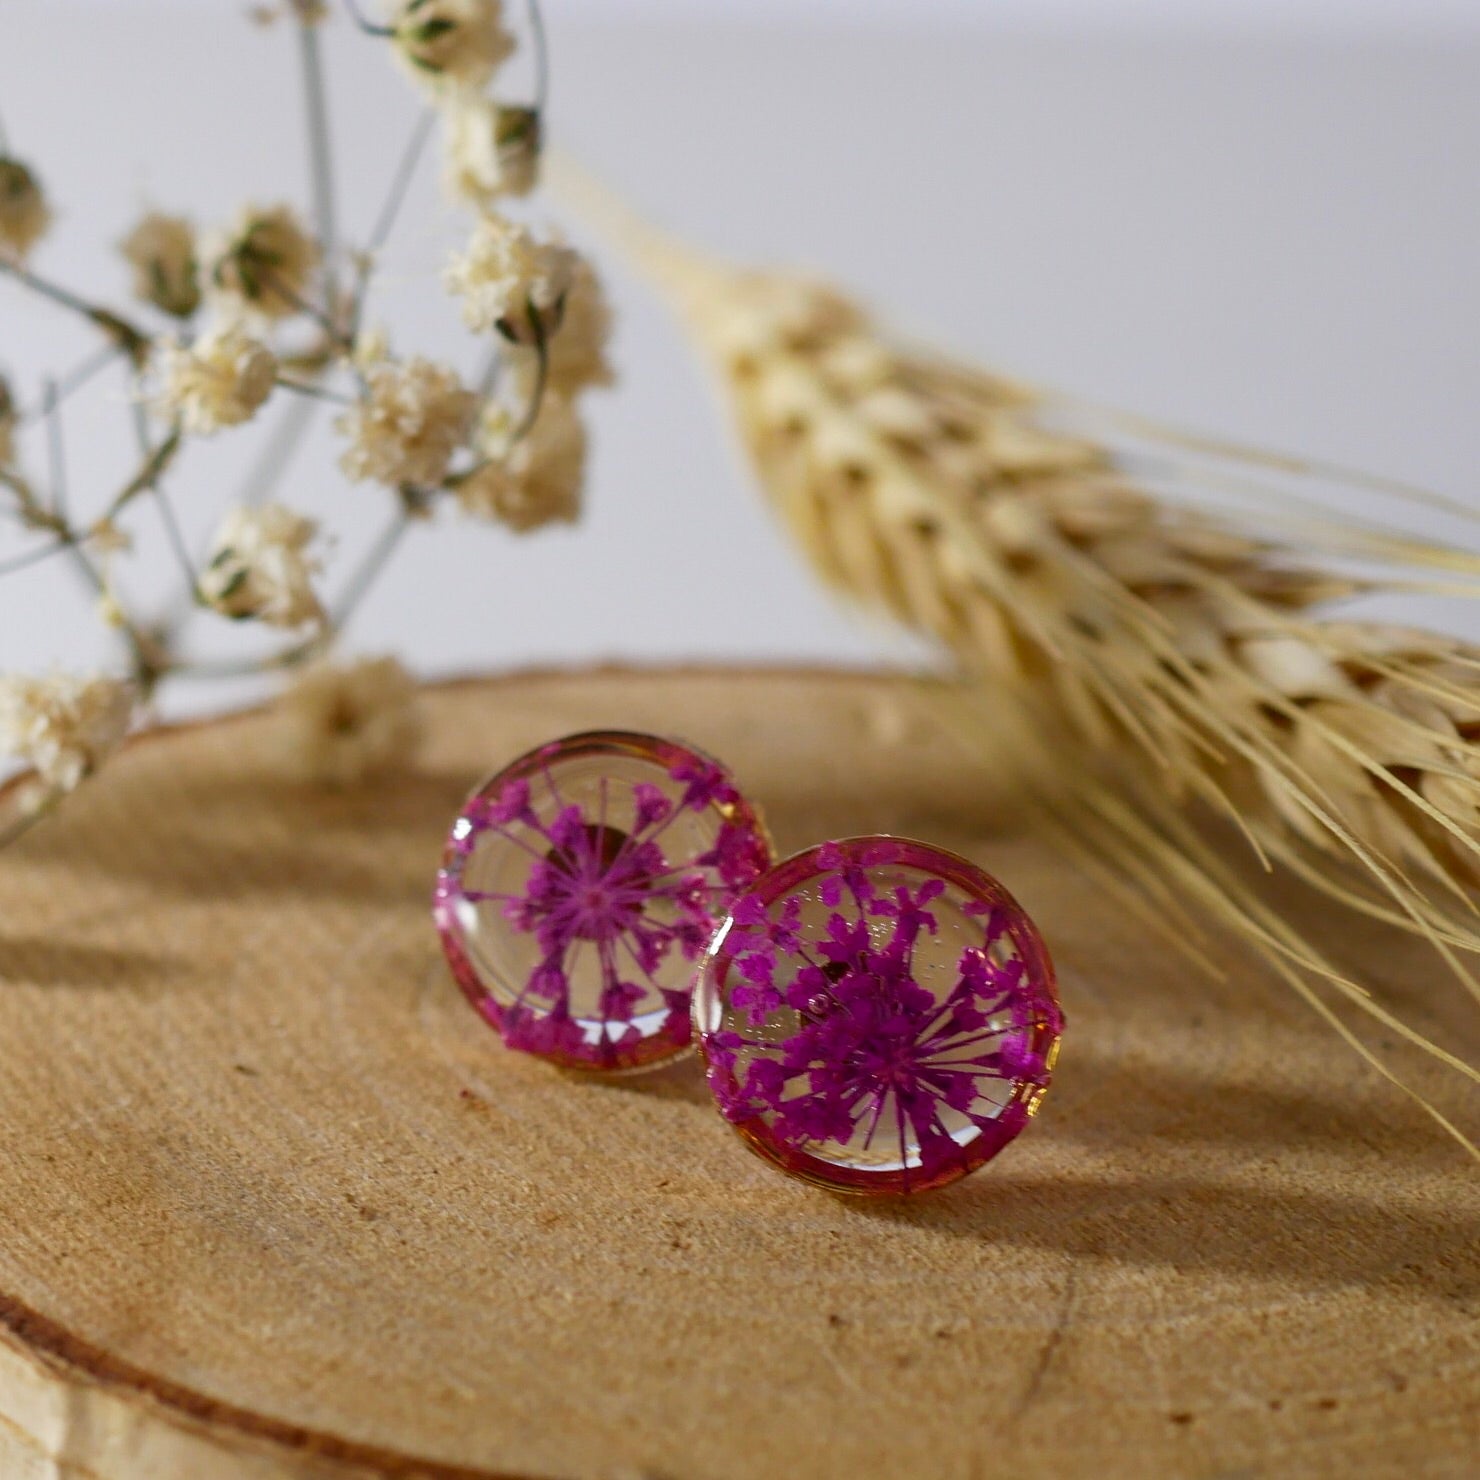 Pink Queen Annes lace Studs